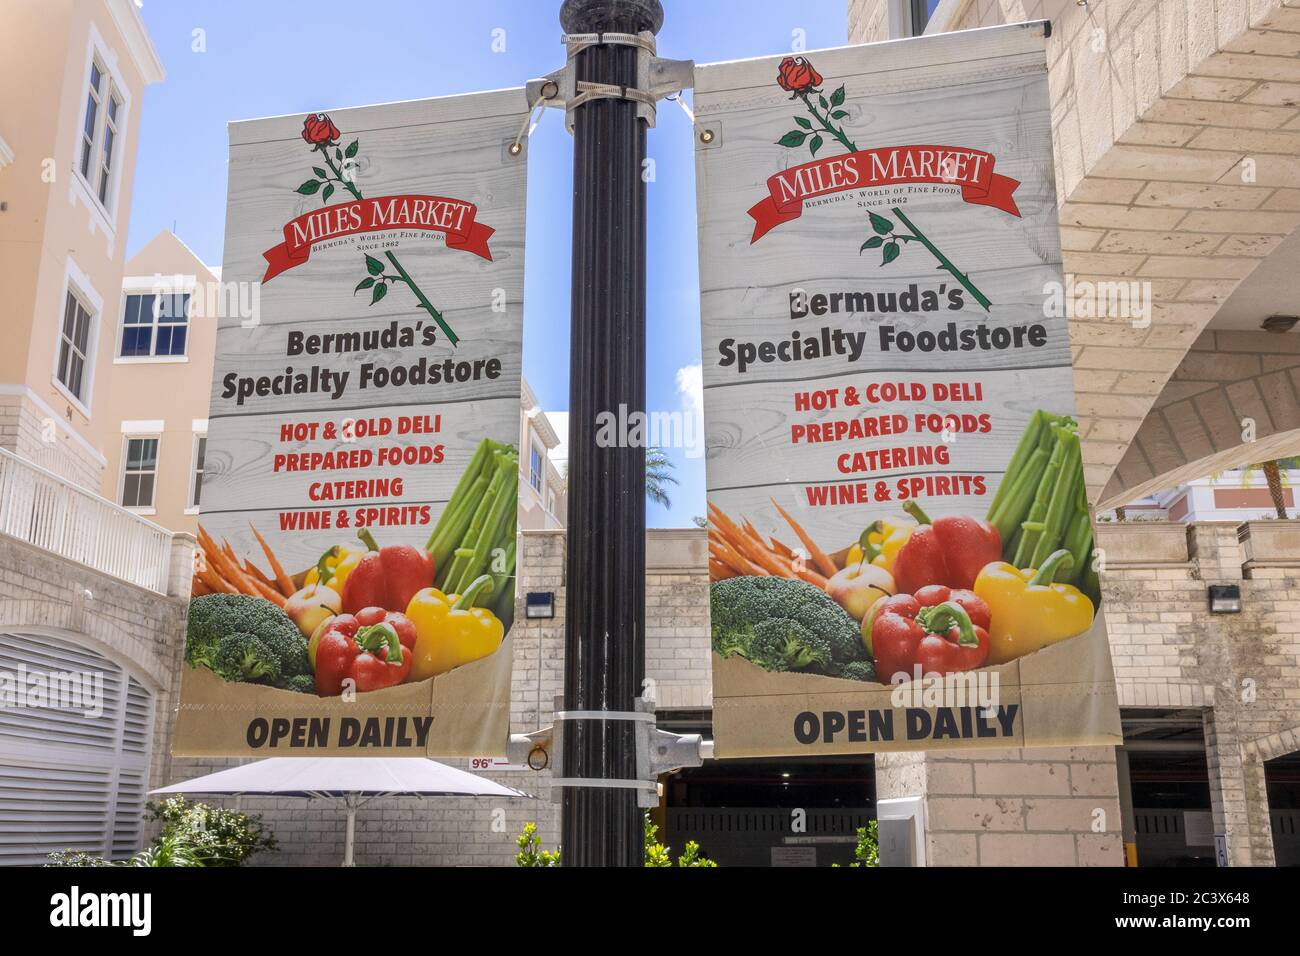 Banner Sign Flags Advertising Miles Market Foodstore Supermarket In Hamilton Bermuda A High End Grocery Store Stock Photo